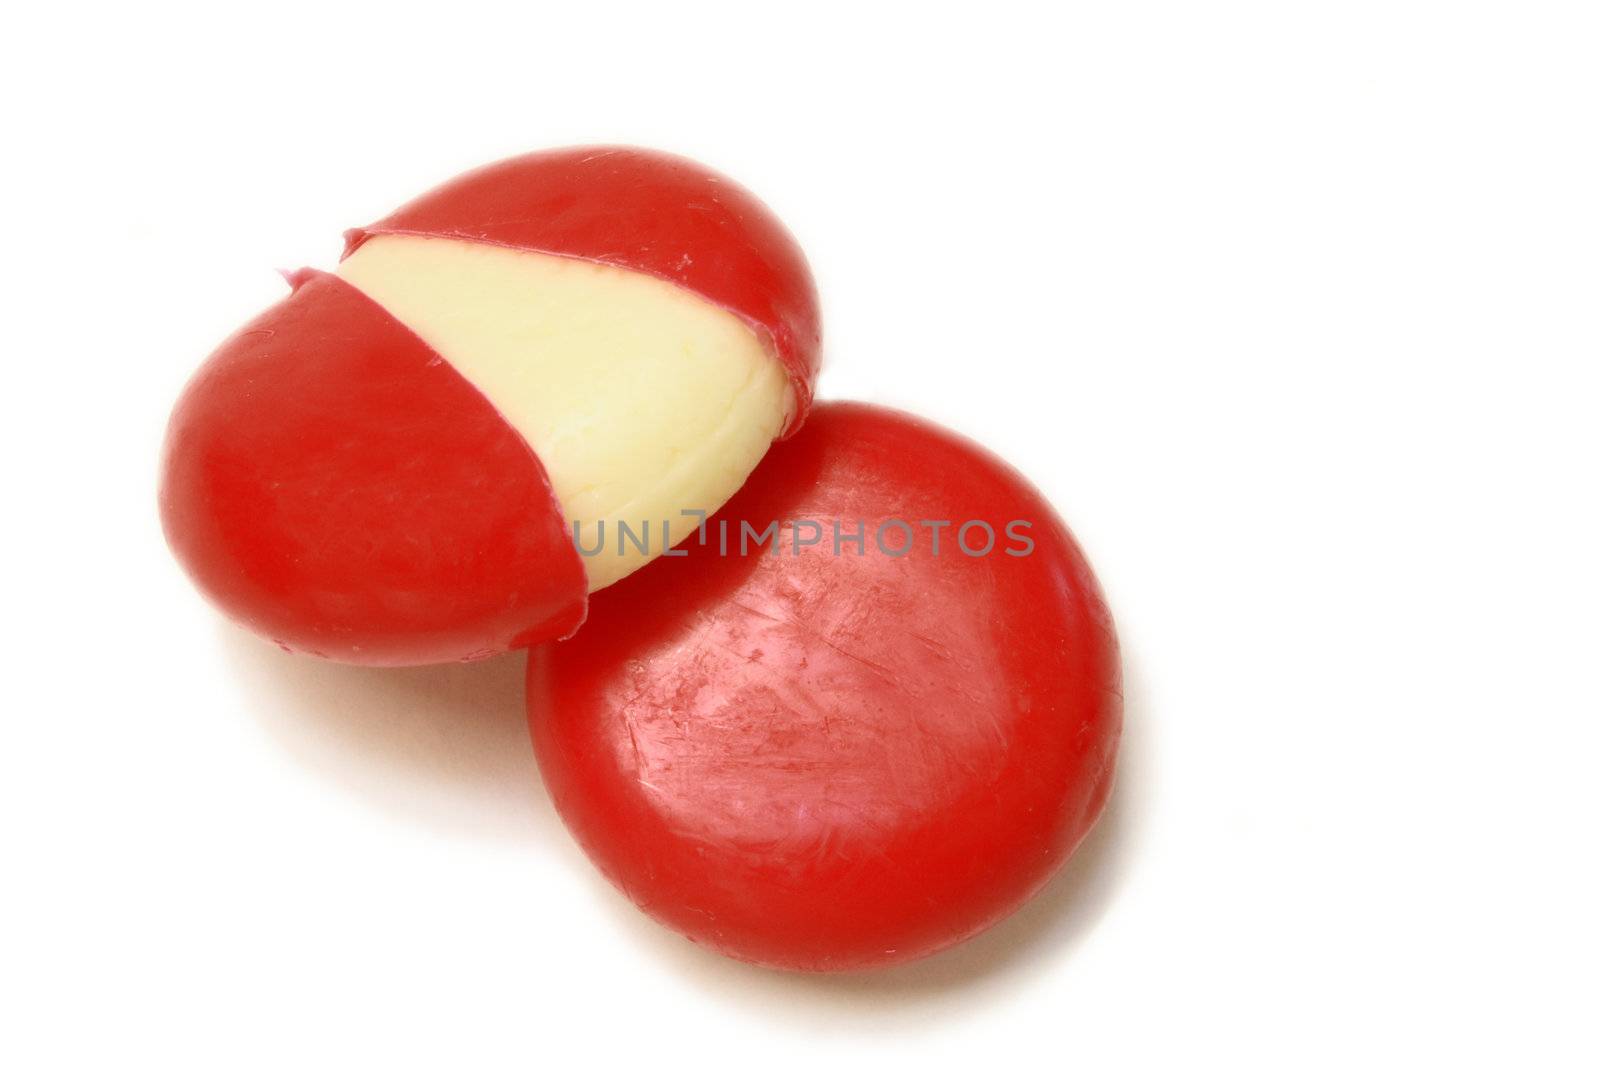 mini edam cheeses in a coating of red wax over a white background